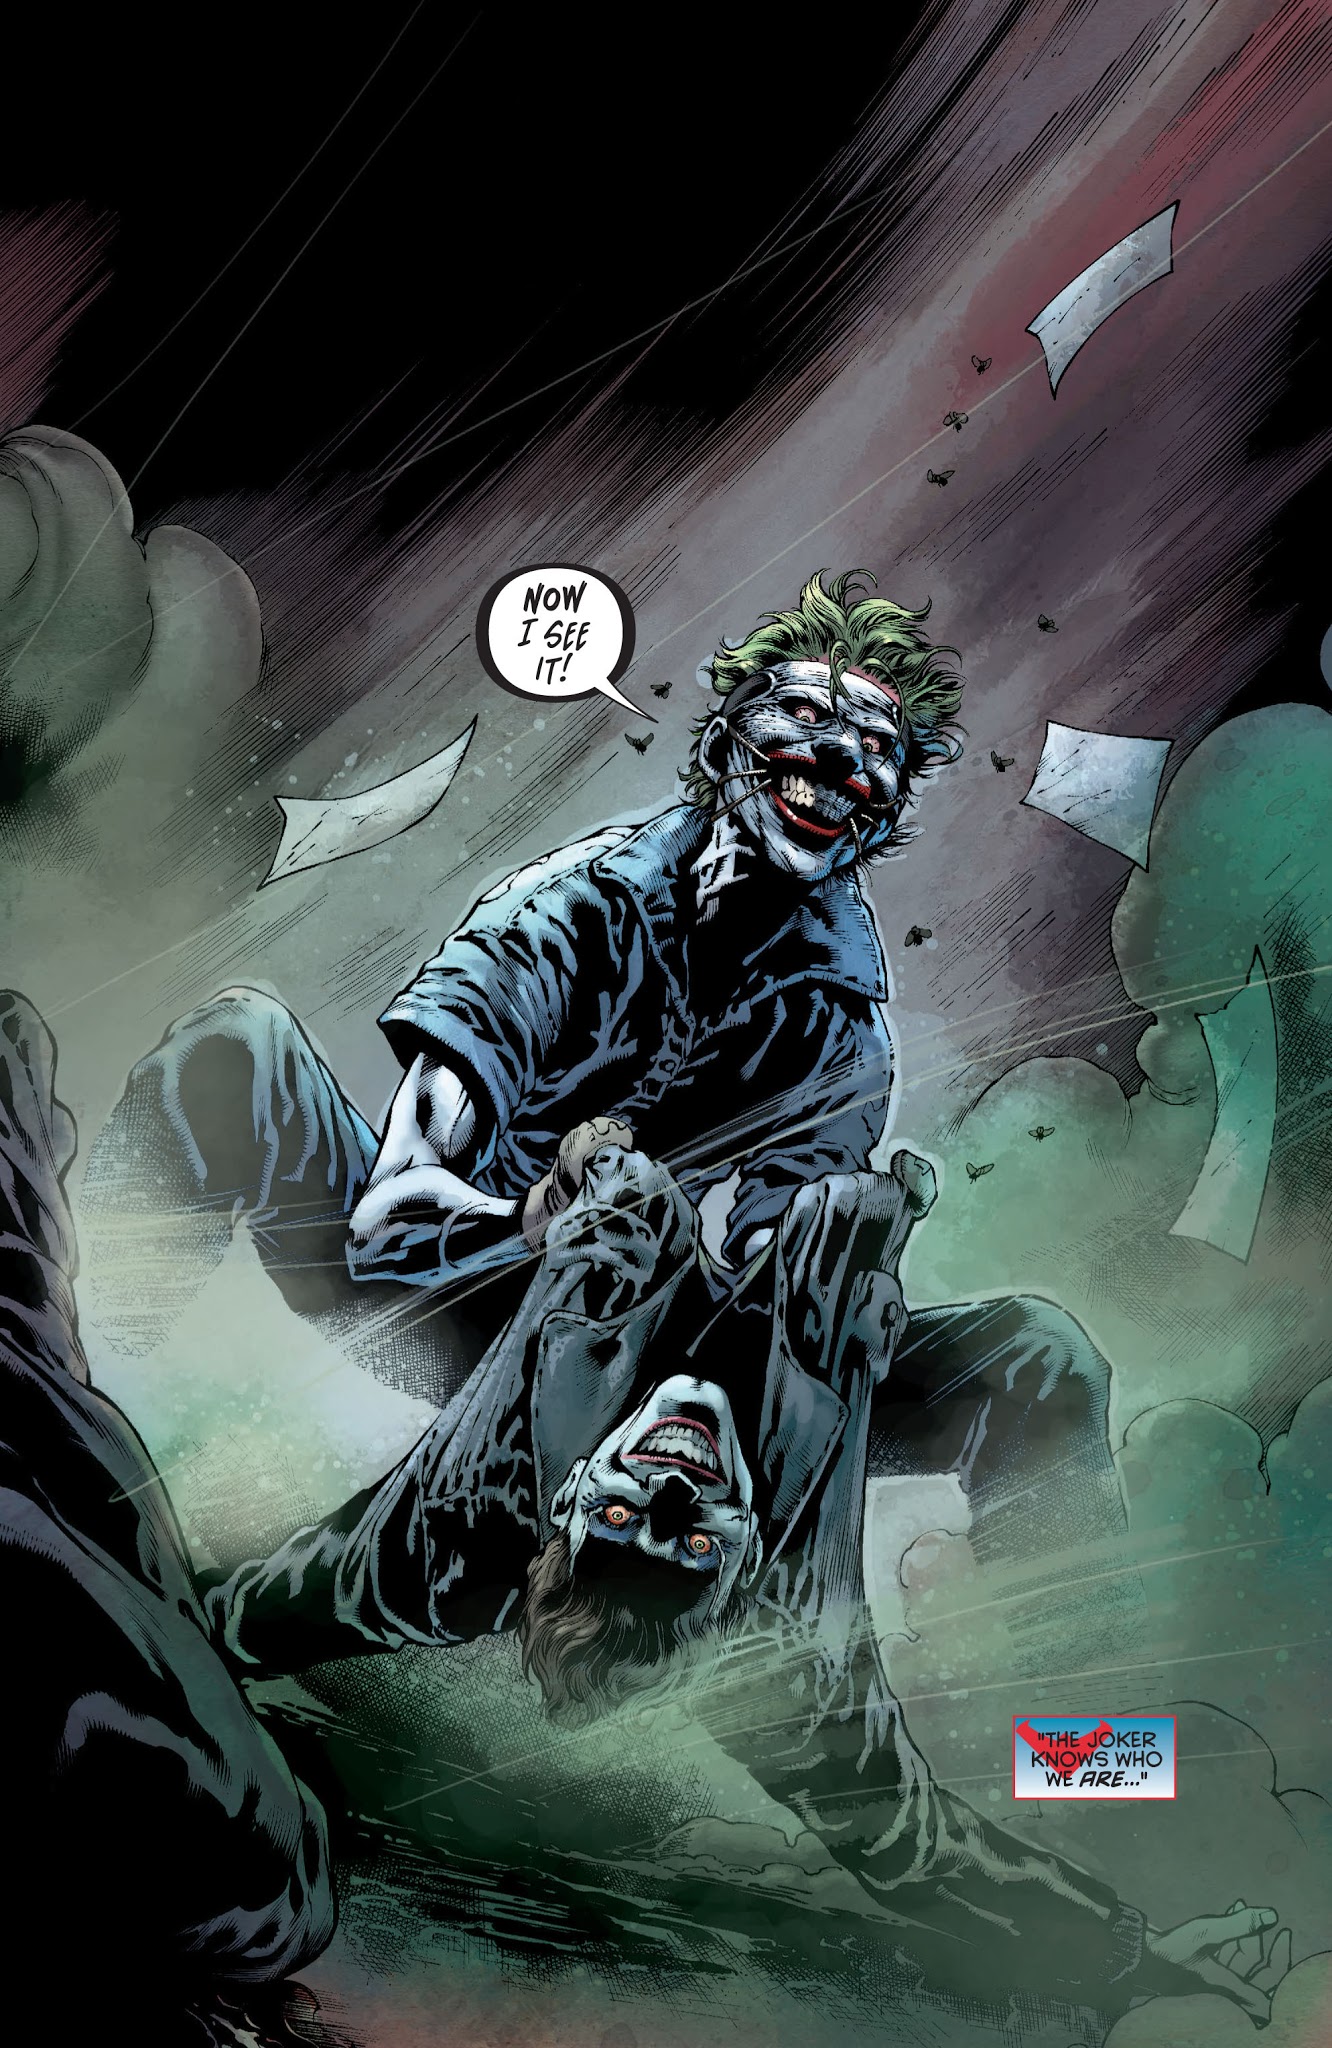 Read online The Joker: Death of the Family comic -  Issue # TPB - 280